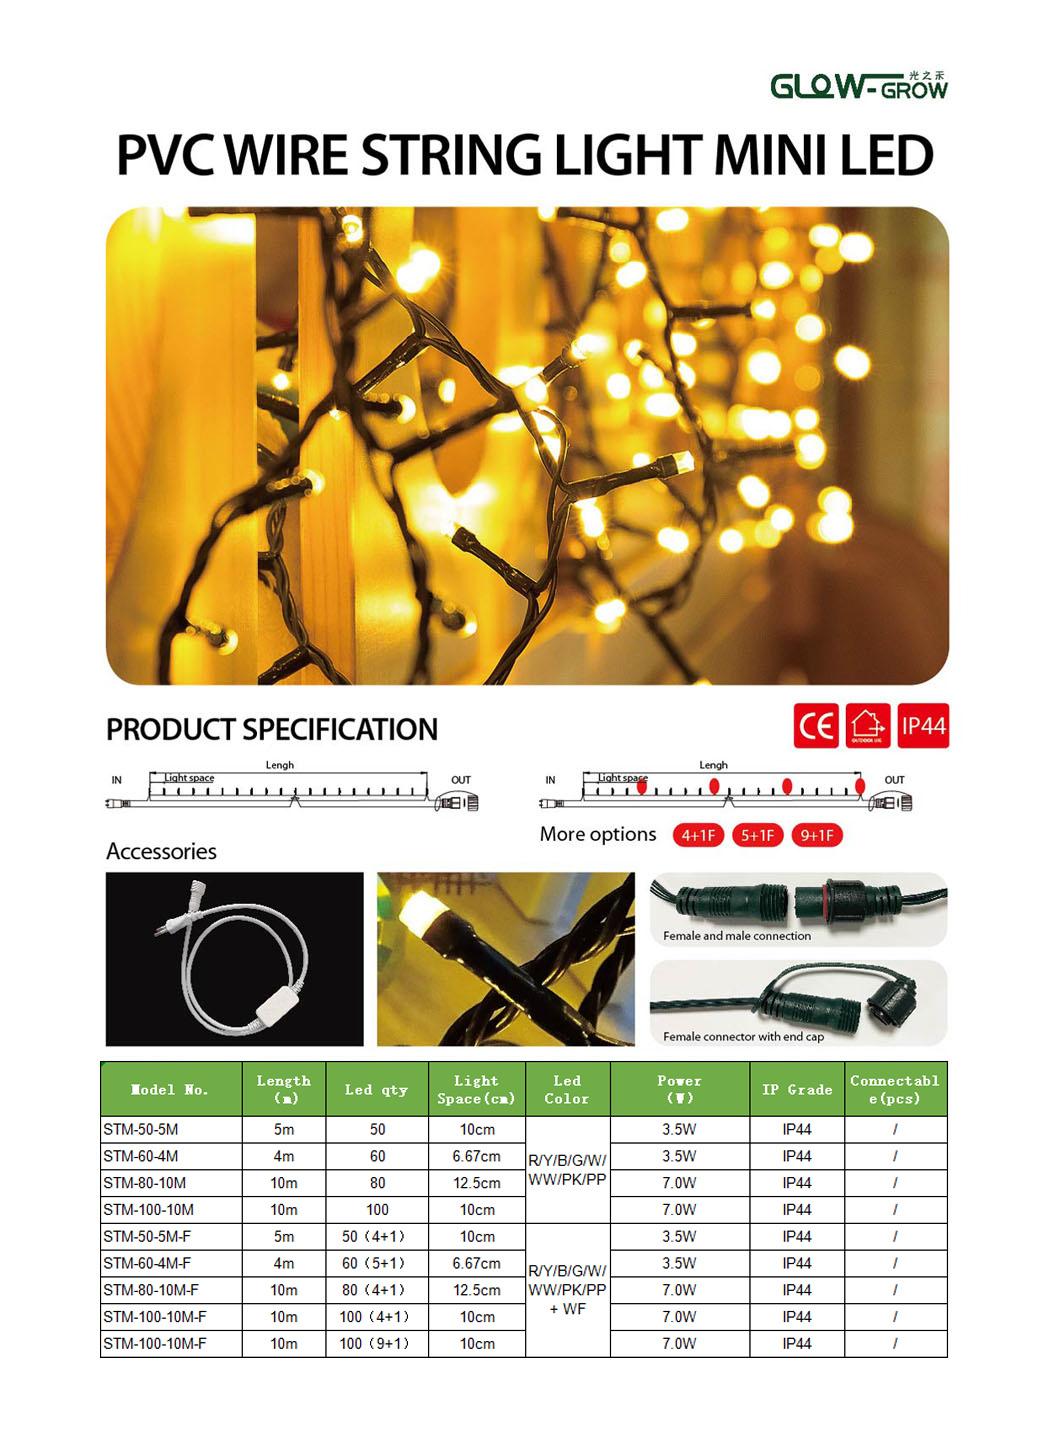 Red Christmas Solar Powered String Light Fairy Light LED Light Chain for Wedding Party Garden Home Street Tree Commercial Decoration